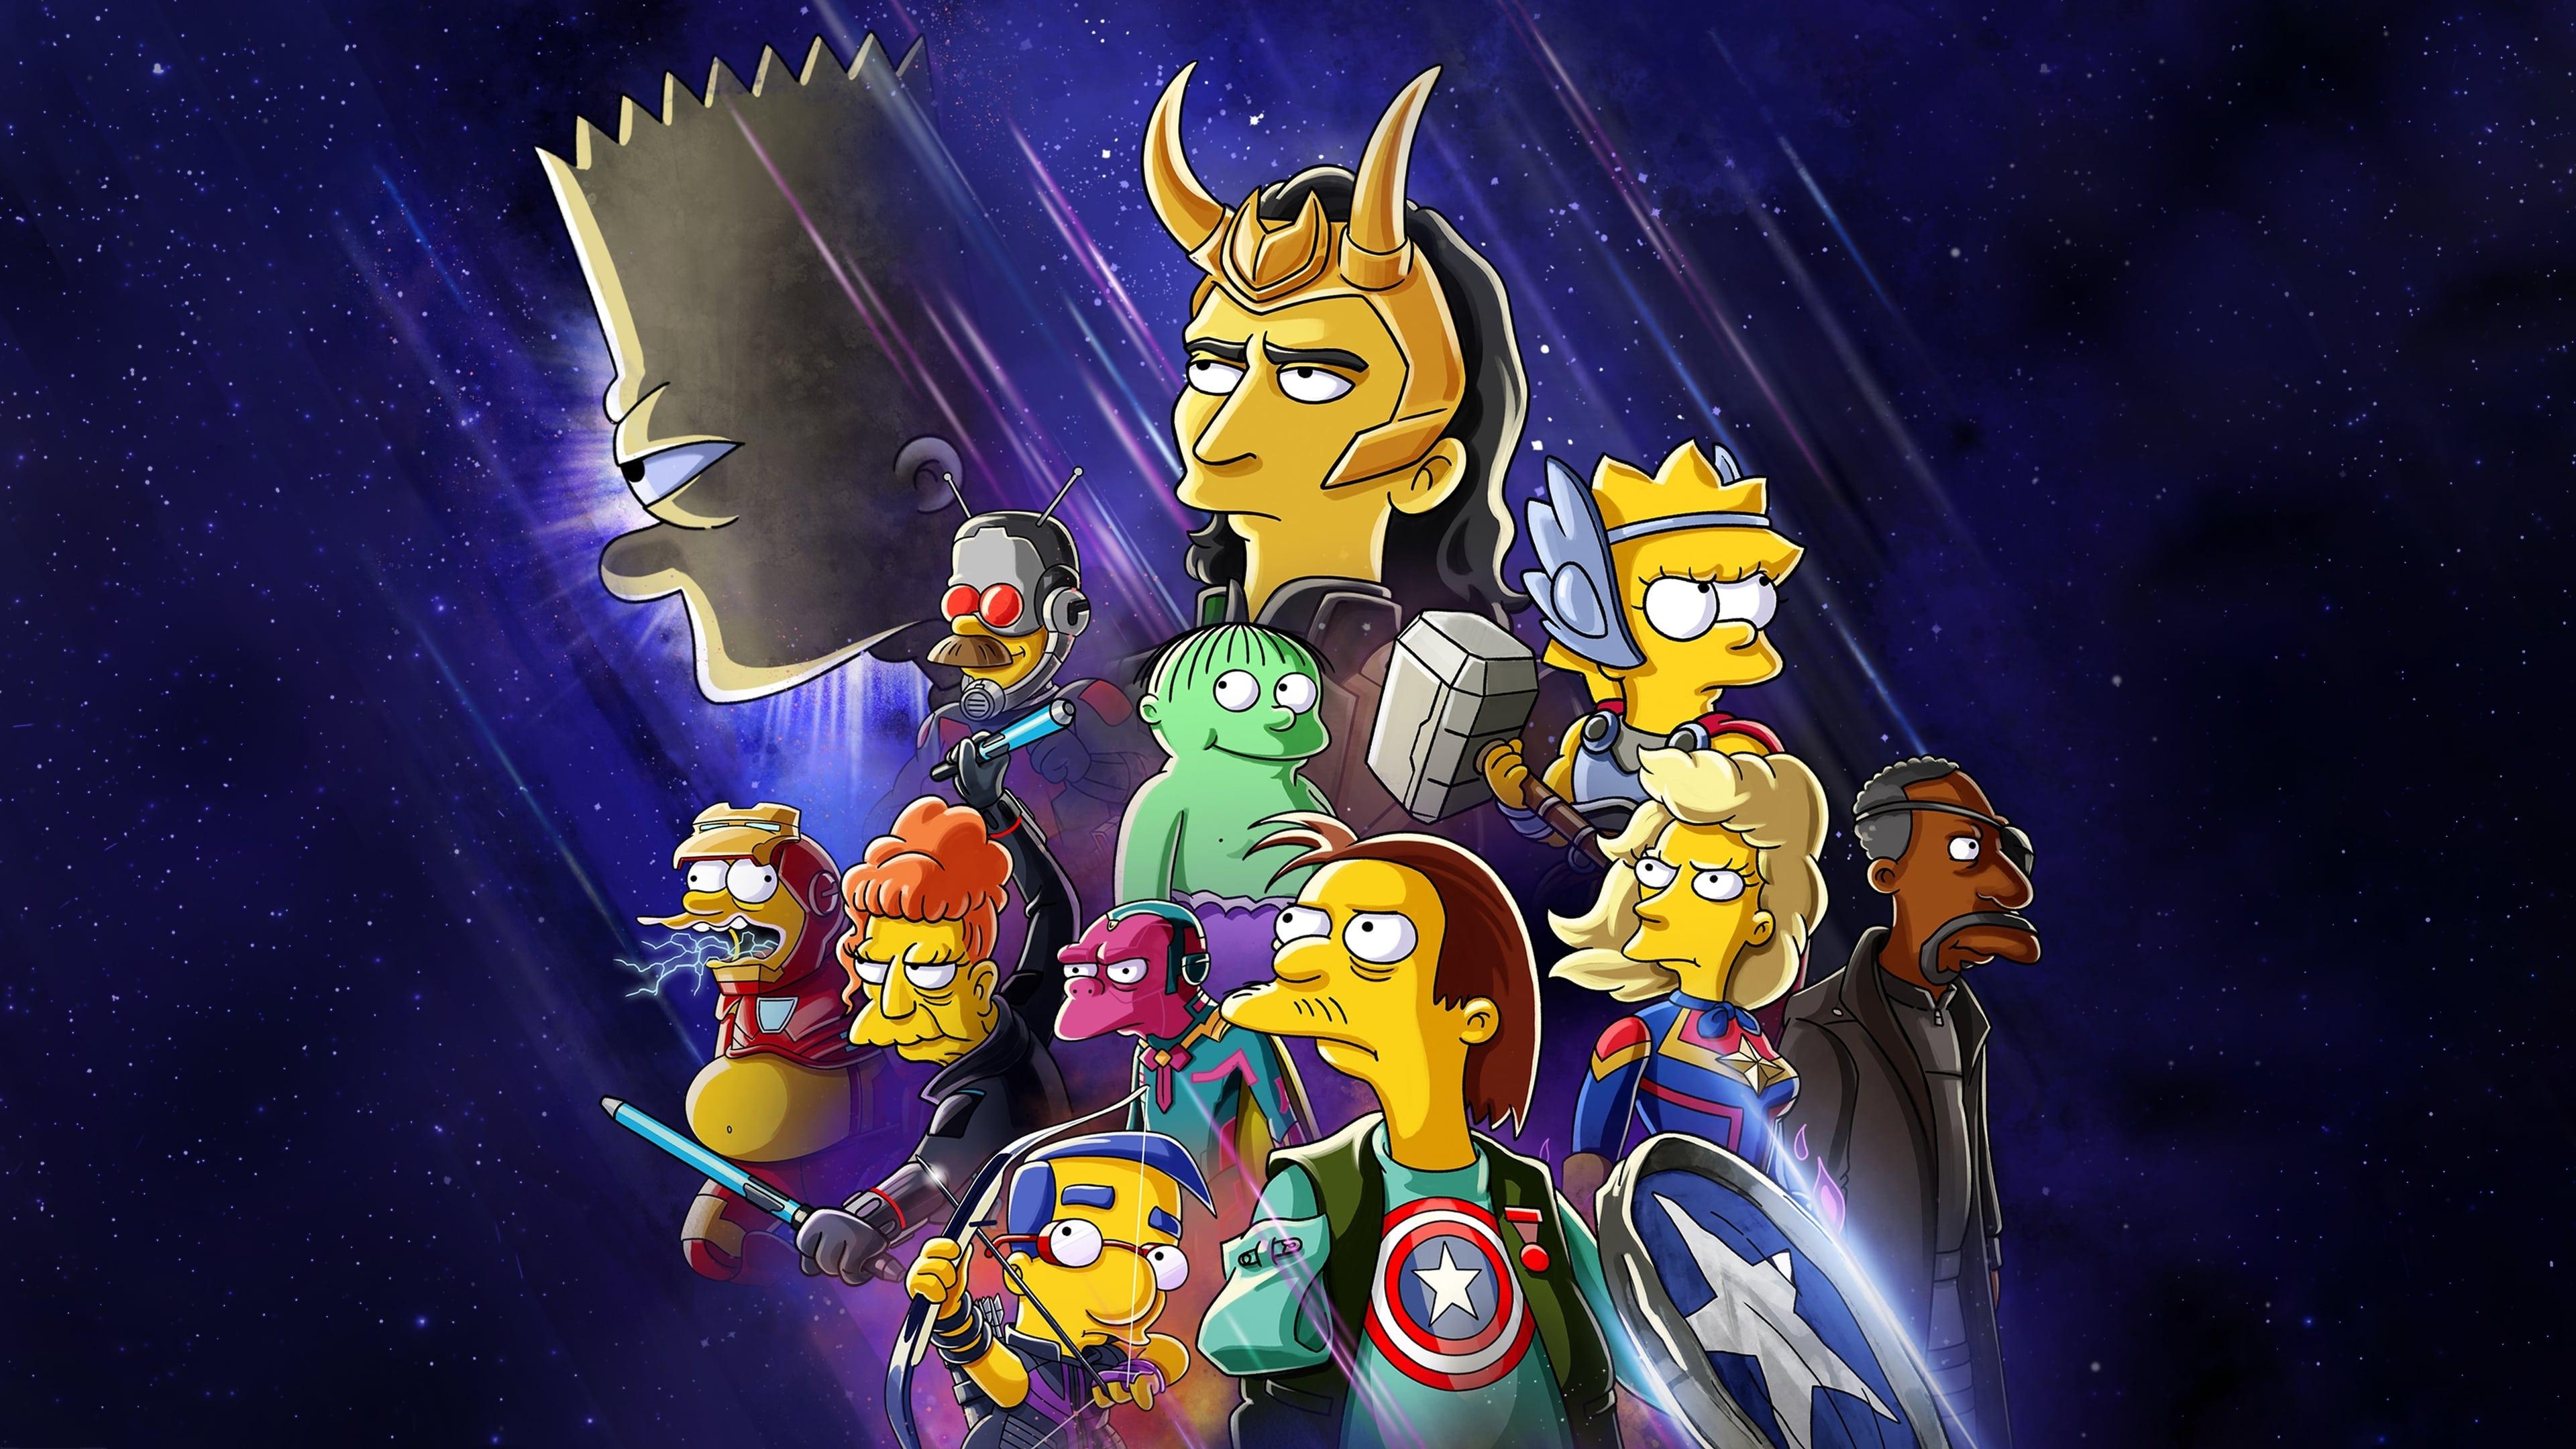 The Simpsons: The Good, the Bart, and the Loki backdrop